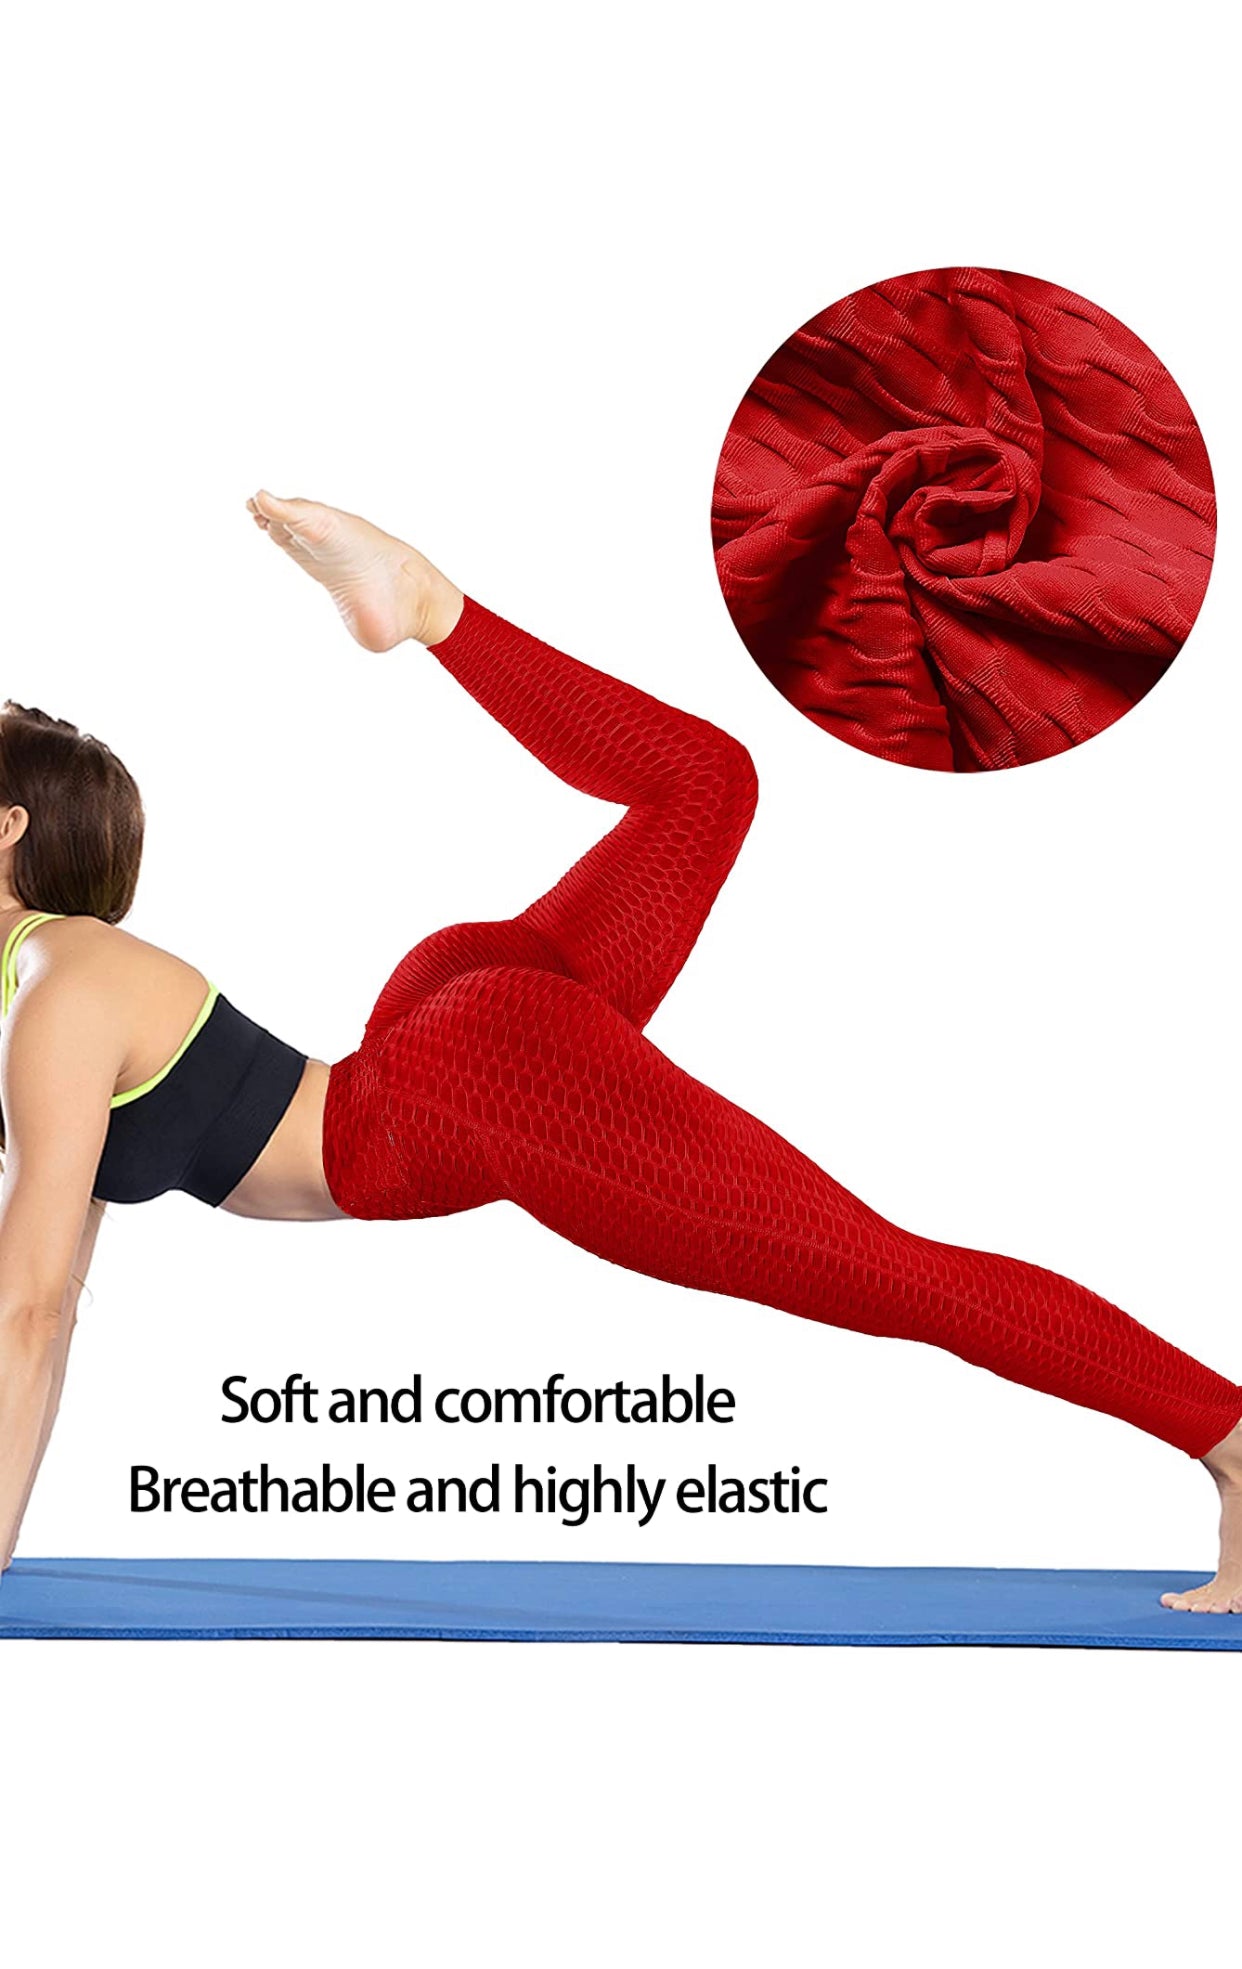 Breathable Honeycomb Textured Sports Leggings  Fashion clothes women,  Sports leggings, Leggings